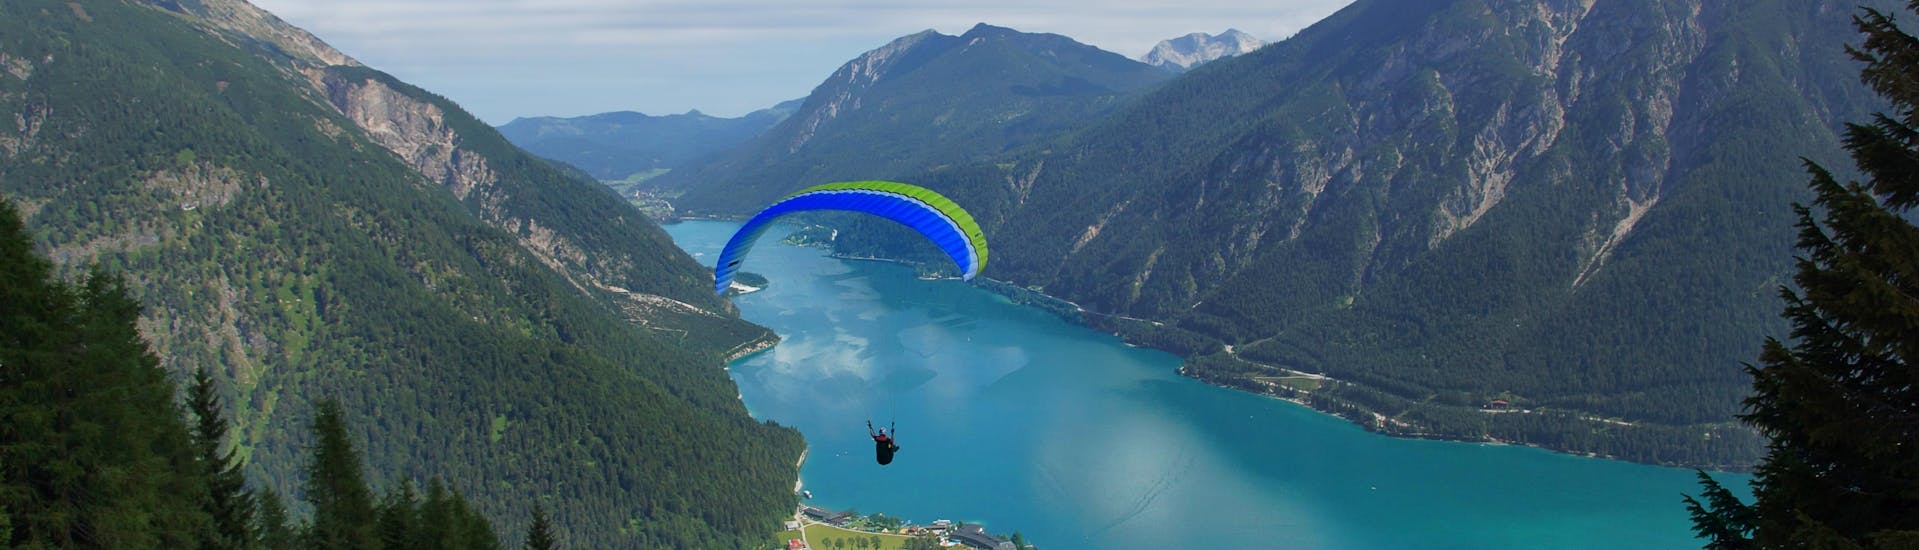 A tandem master and his passenger are sailing through cloudy skies while paragliding in Achensee.